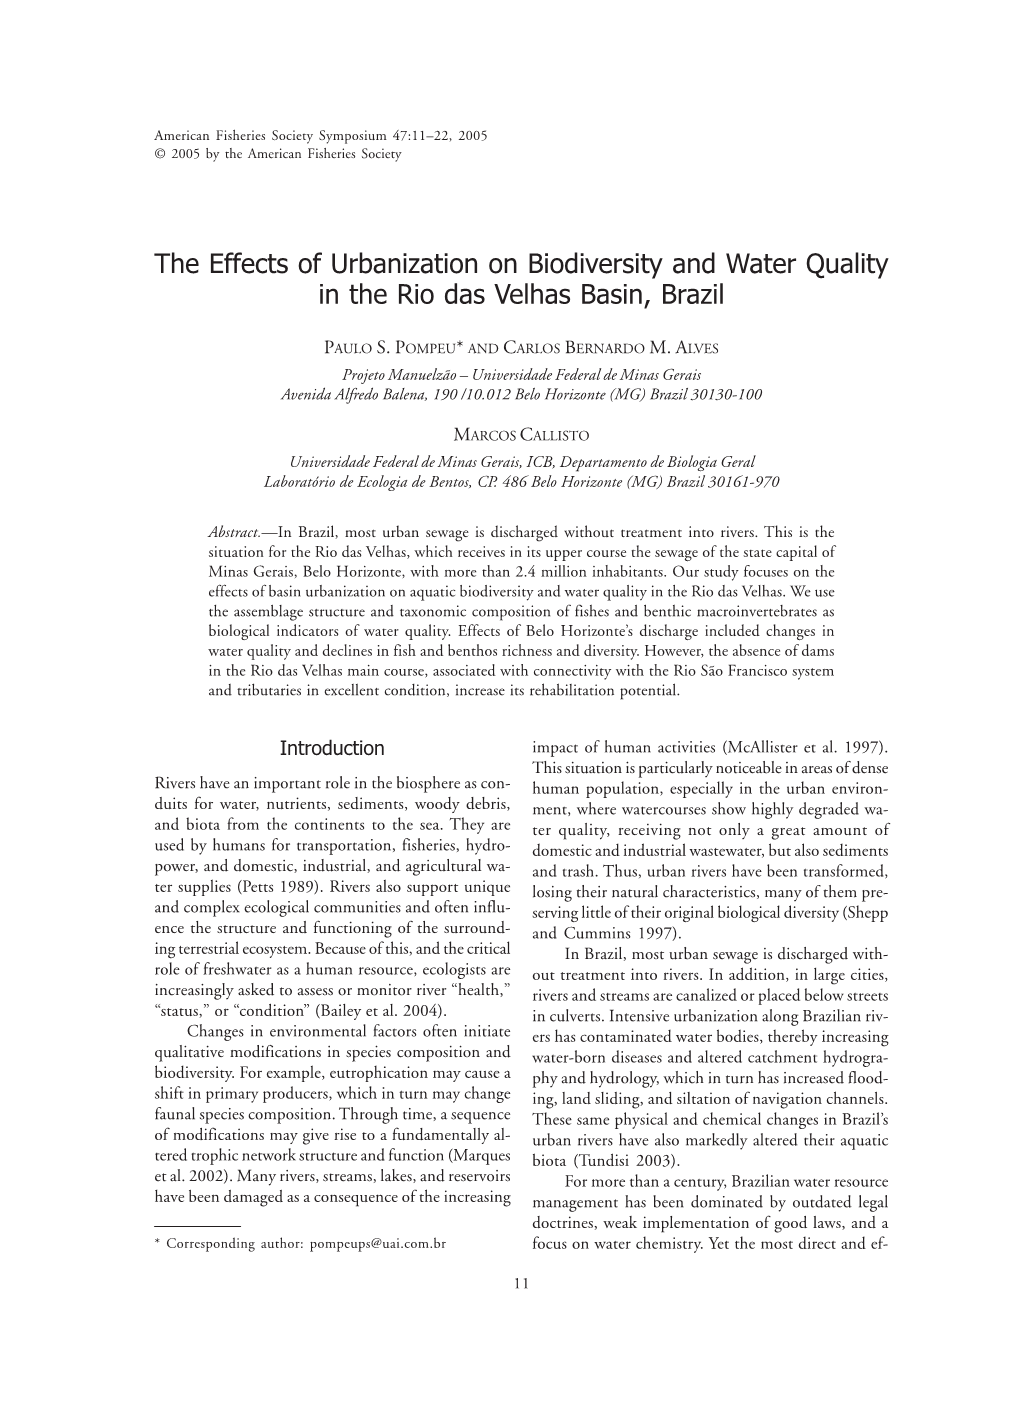 The Effects of Urbanization on Biodiversity and Water Quality in the Rio Das Velhas Basin, Brazil